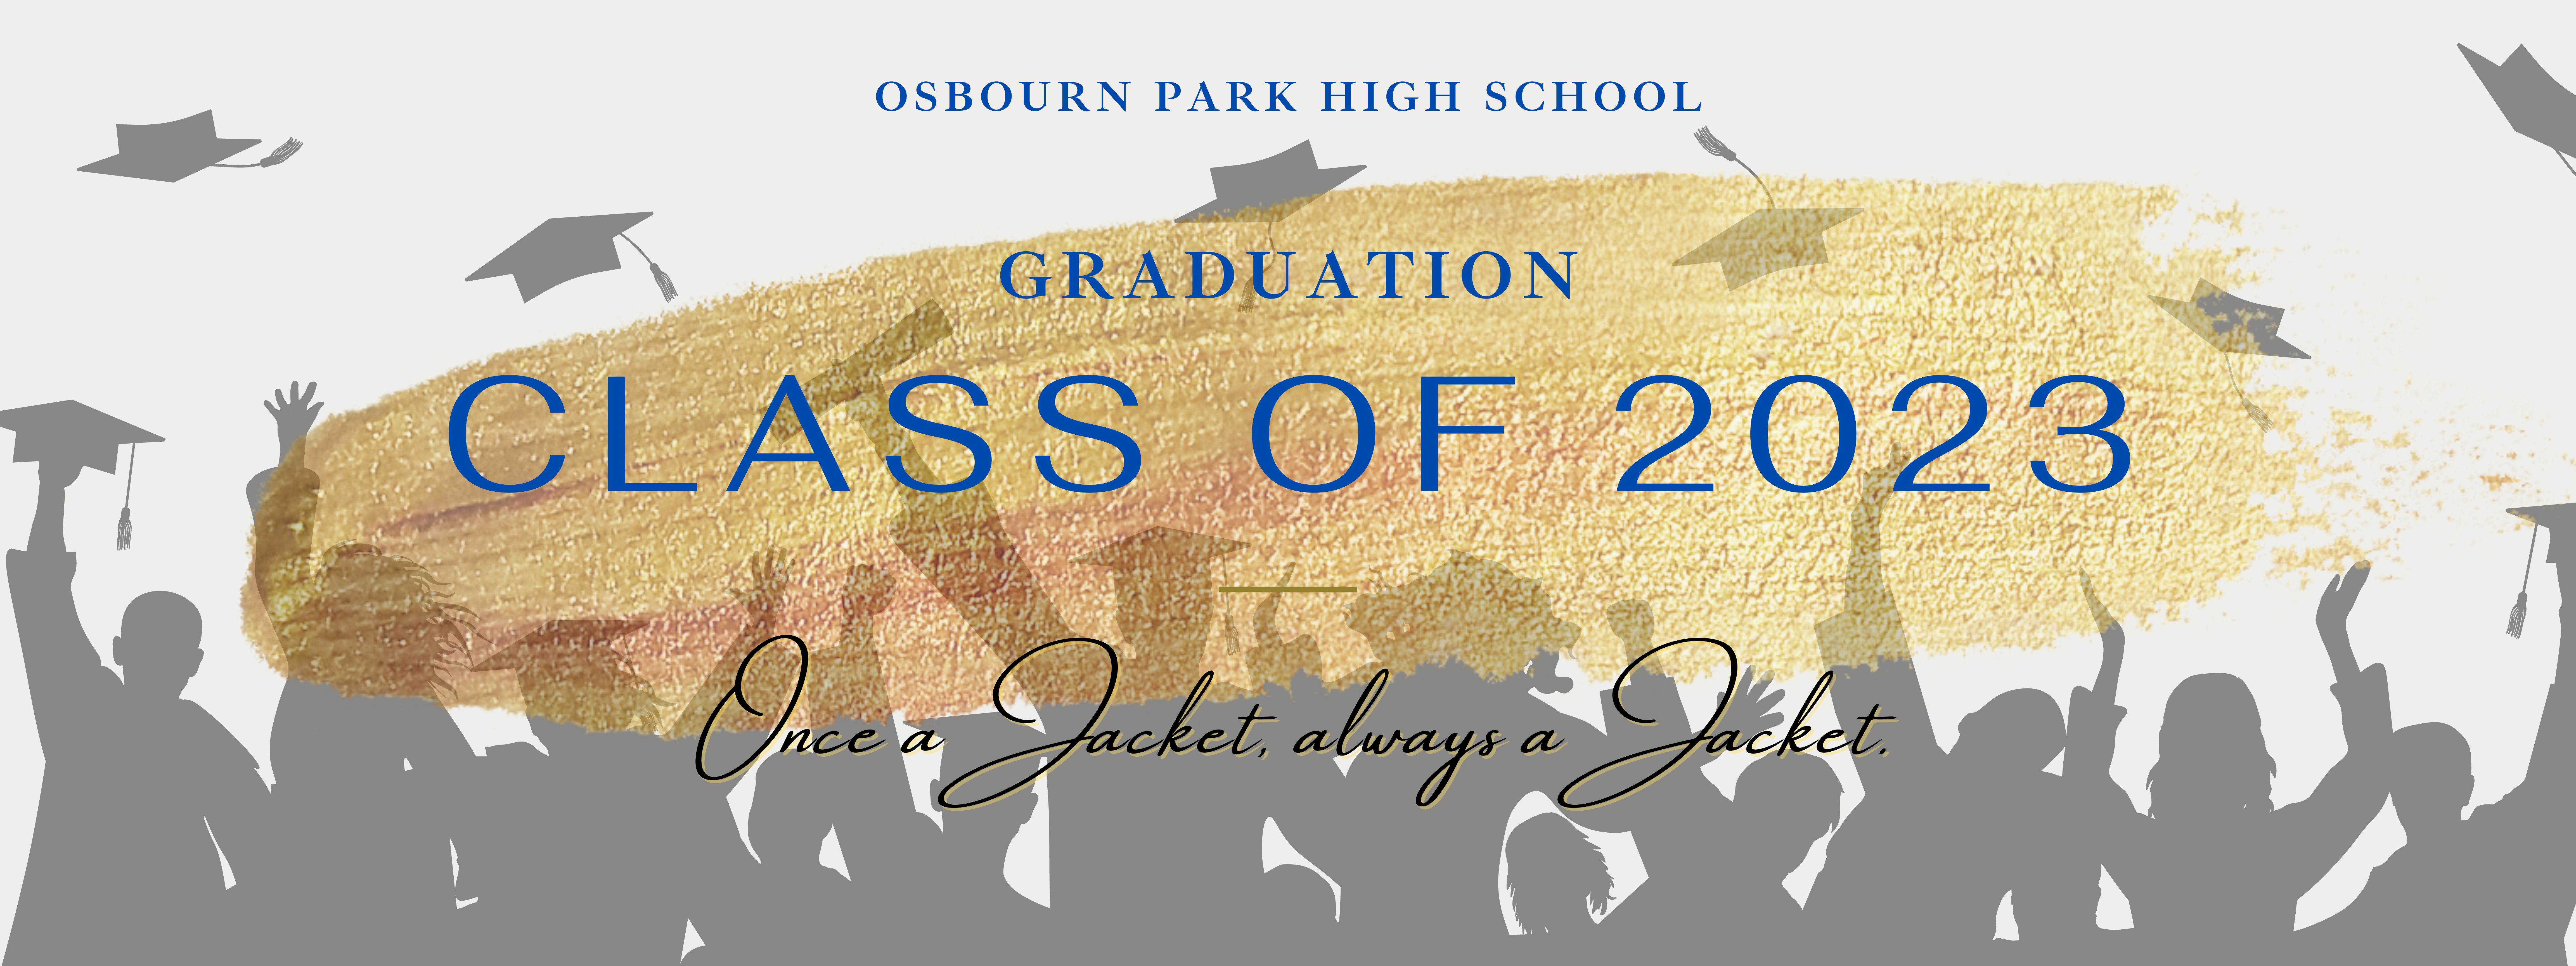 Osbourn Park High School Graduation Class of 2023, Once a Jacket, always a Jacket.  Silhouette crowd throwing graduation caps behind the type and a smudge of gold paint. 